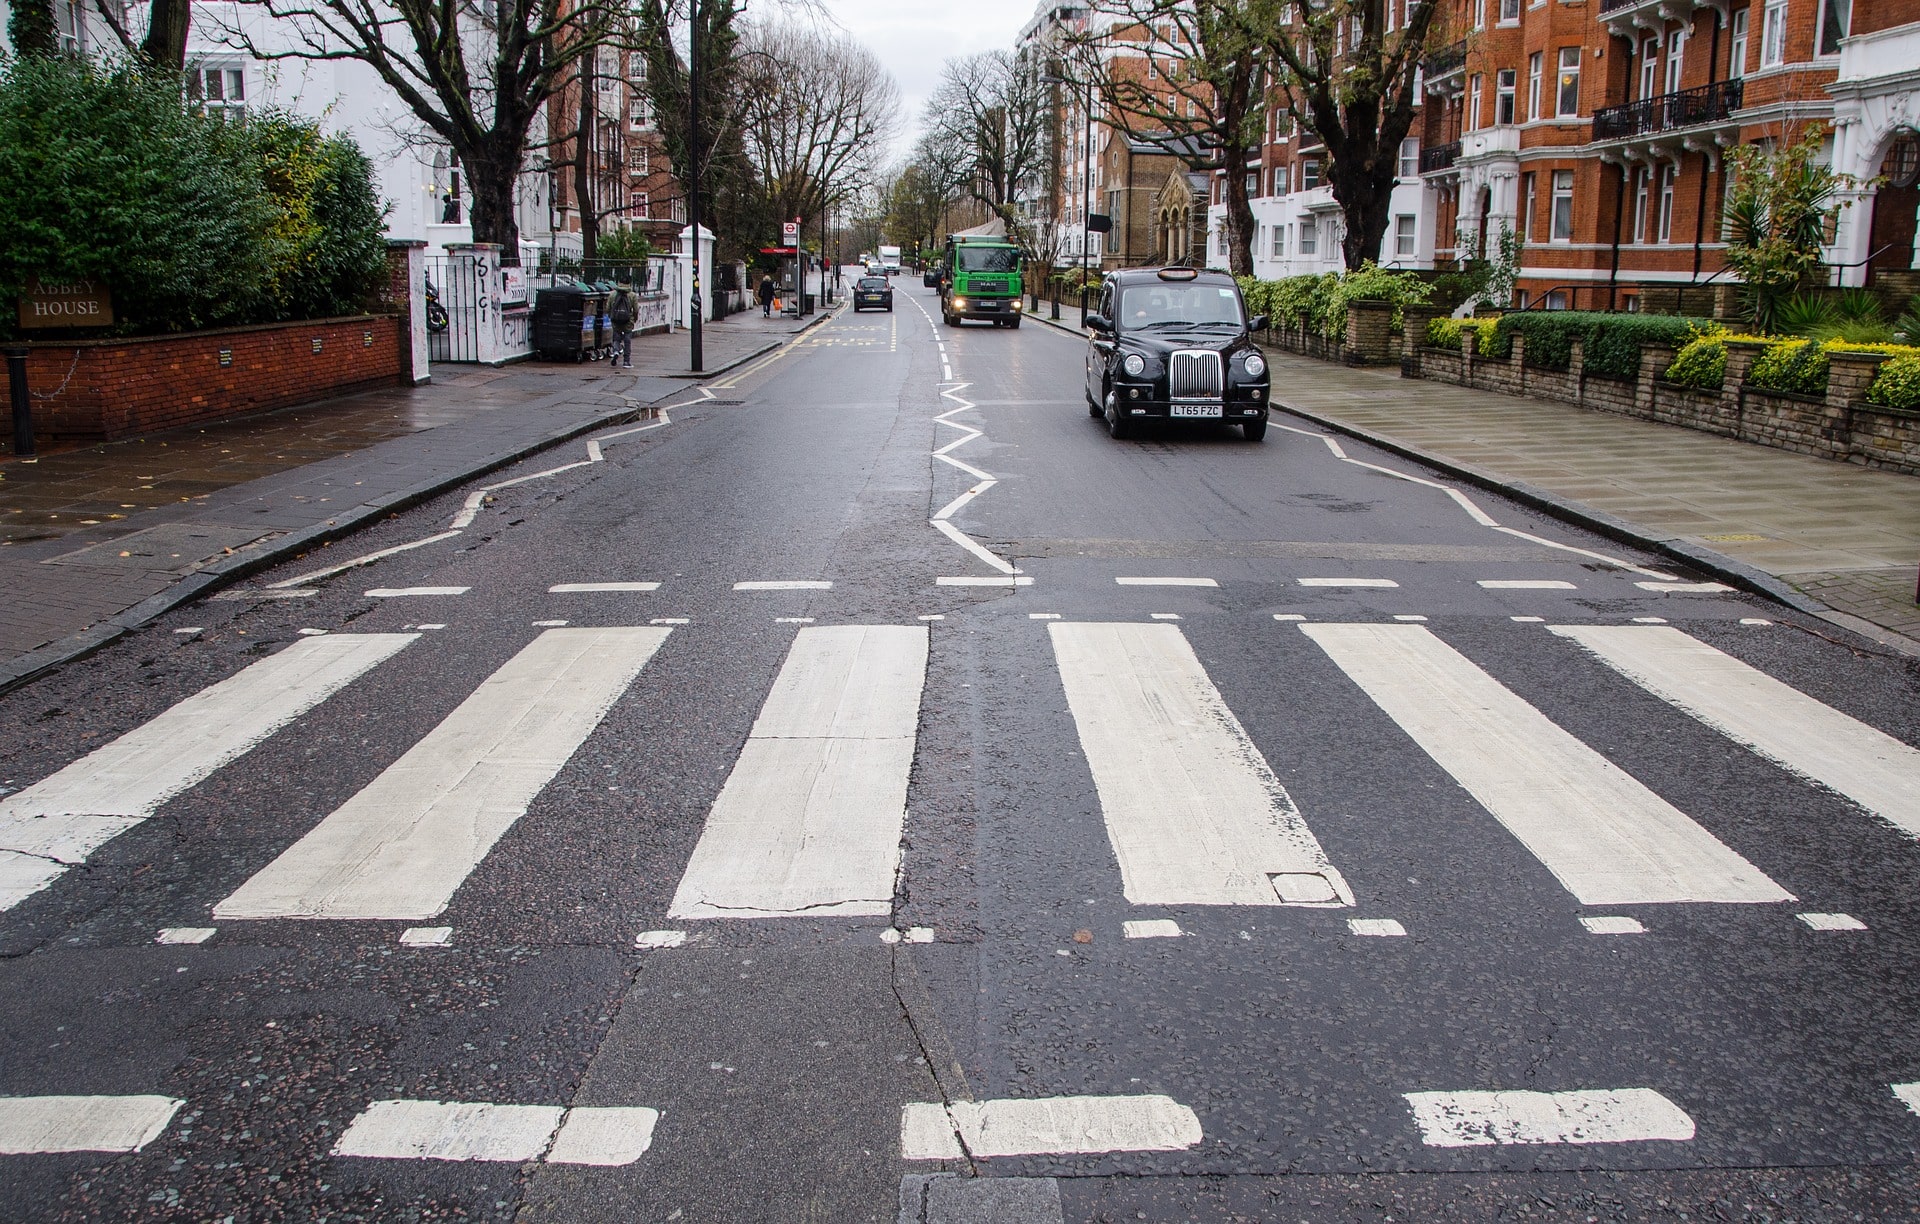 The iconic Abbey Road, made famous by the Beatles, is a cool place to visit in London